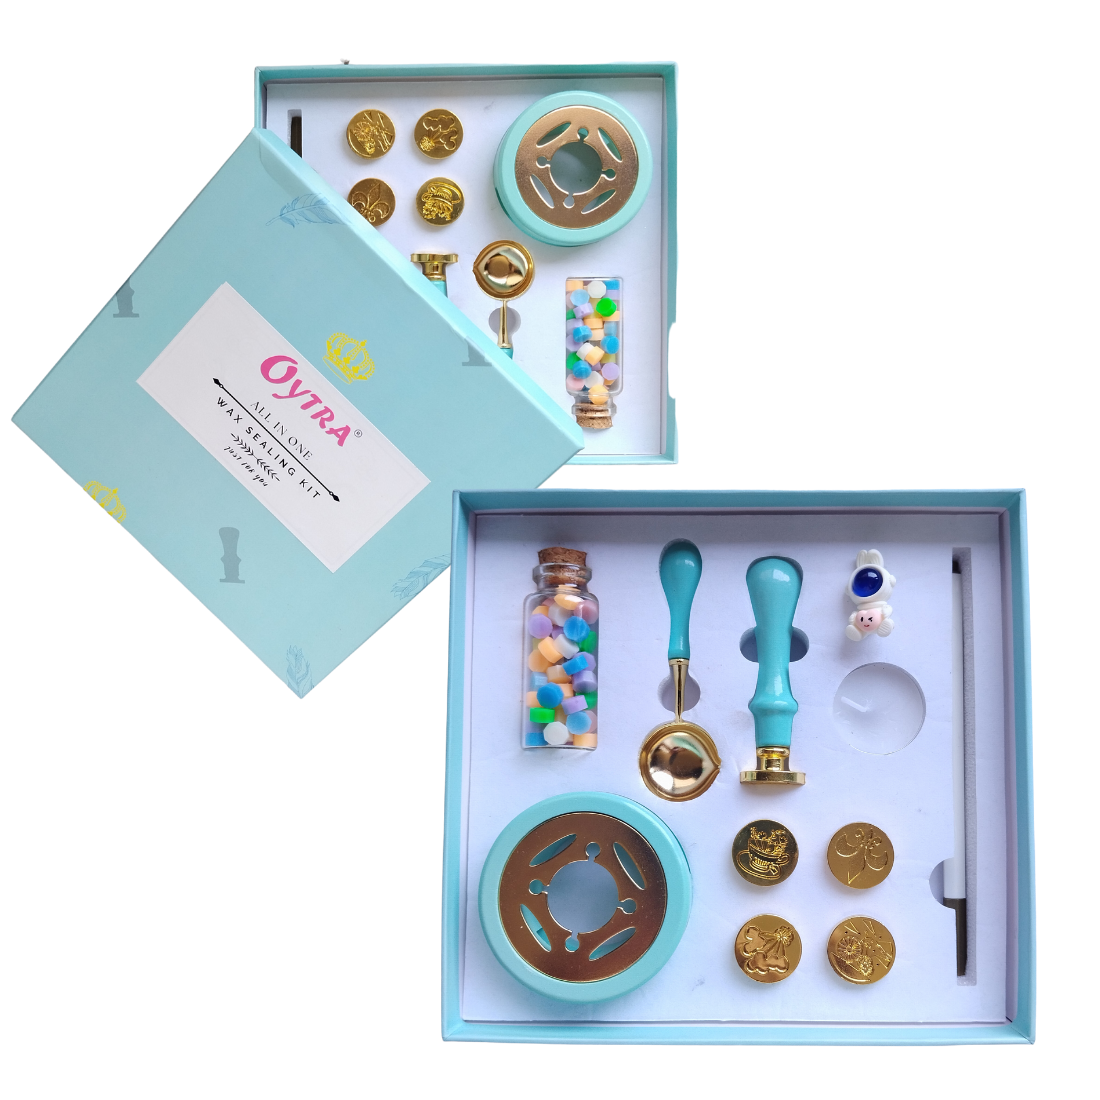 Wax Seal Stamps & Beads - Oytra